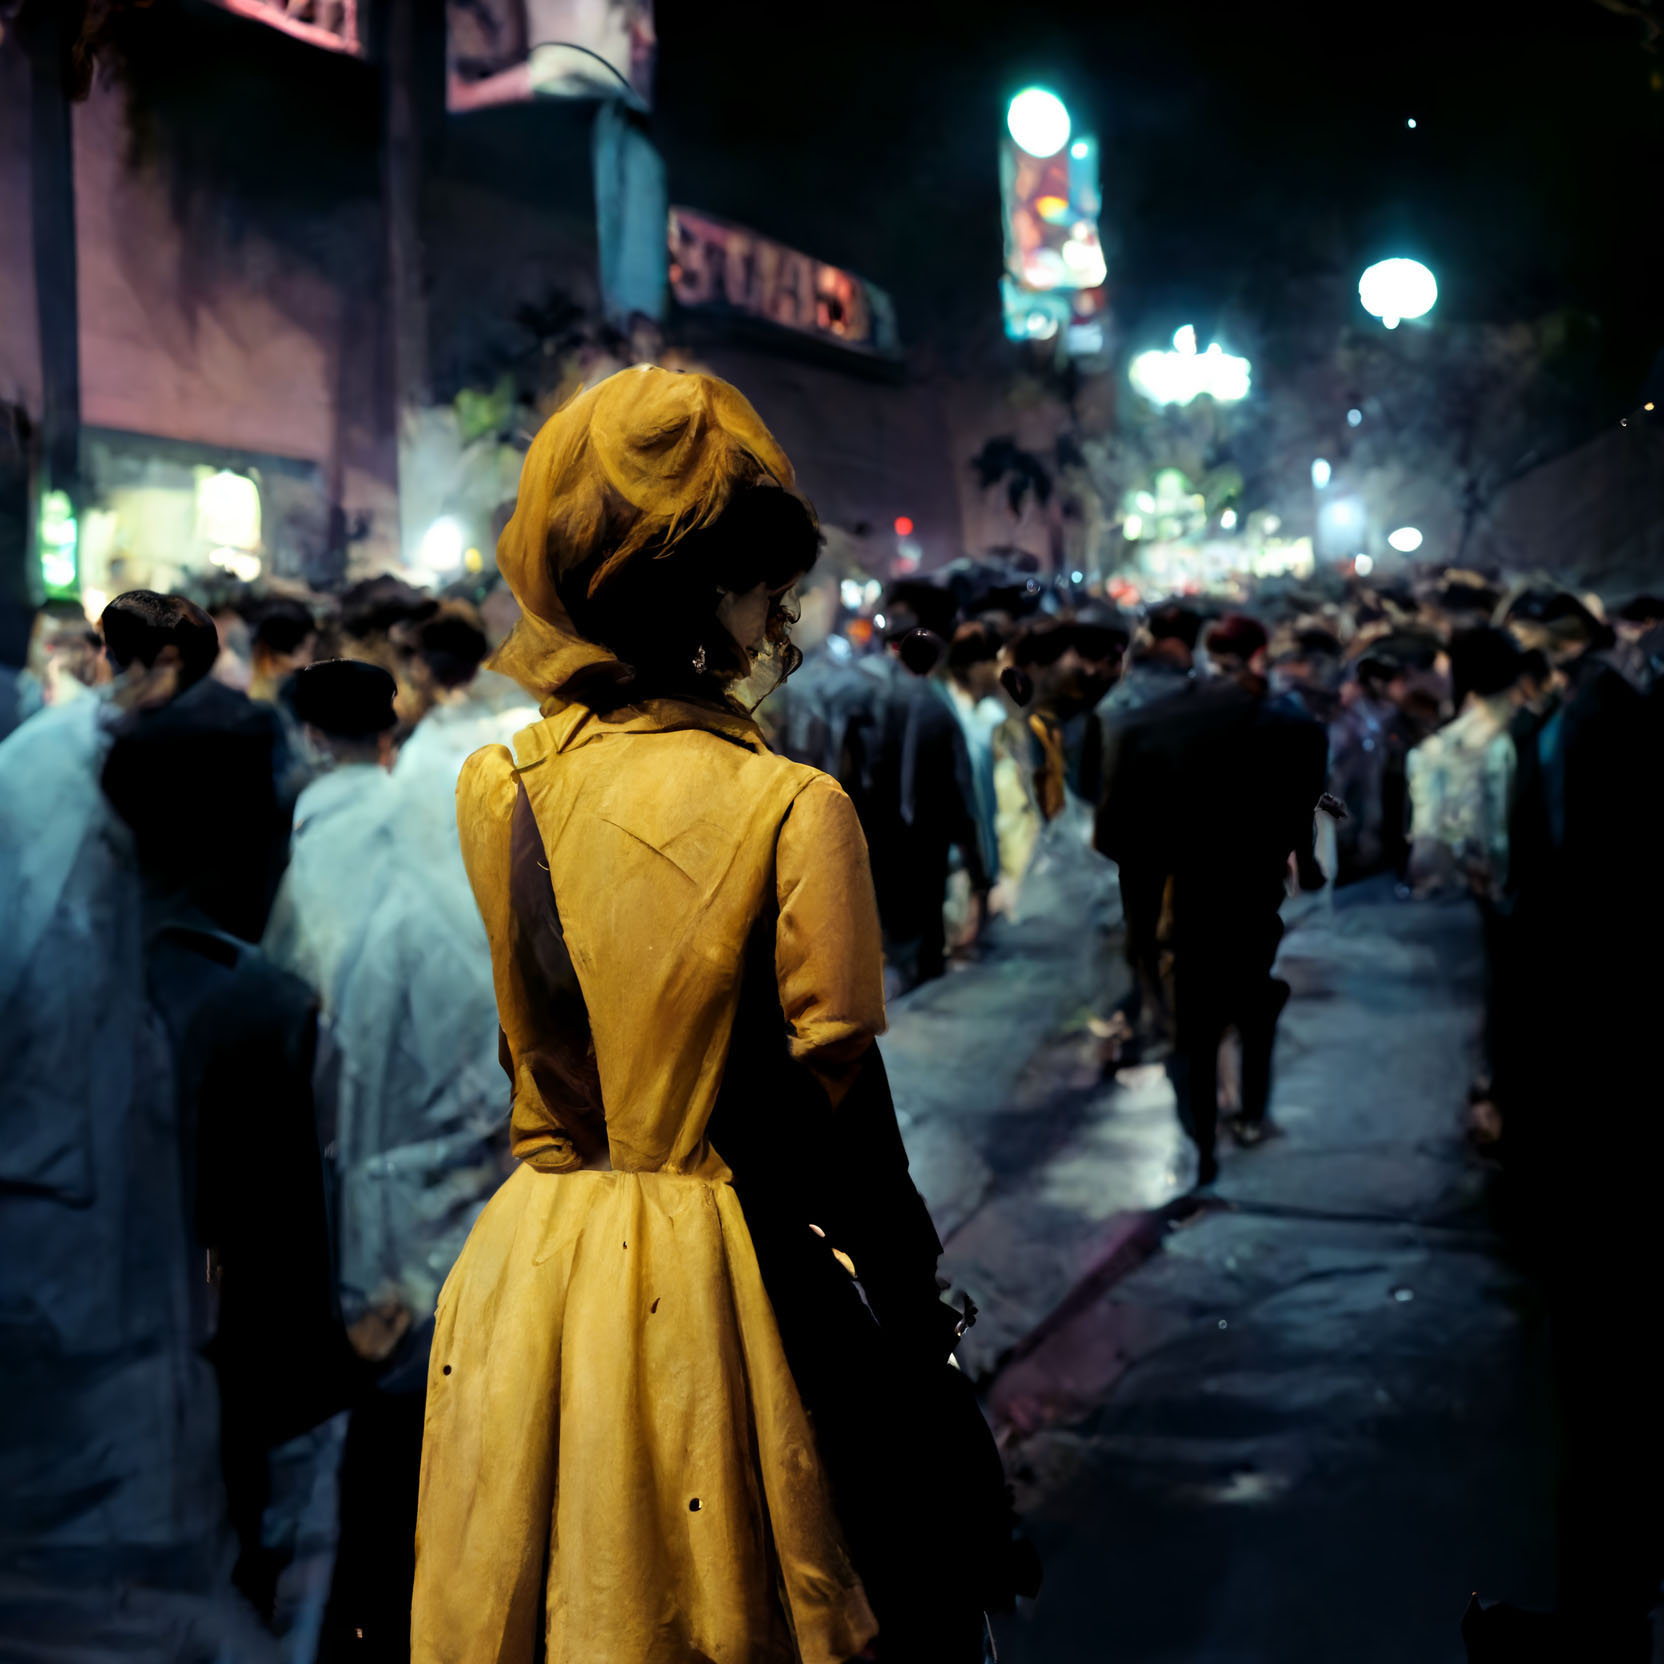 JanieFitzgerald_a_woman_is_walking_on_Hollywood_Blvd._at_night__3bfdf1a9-cde0-4d64-94dc-91c42f3110fc